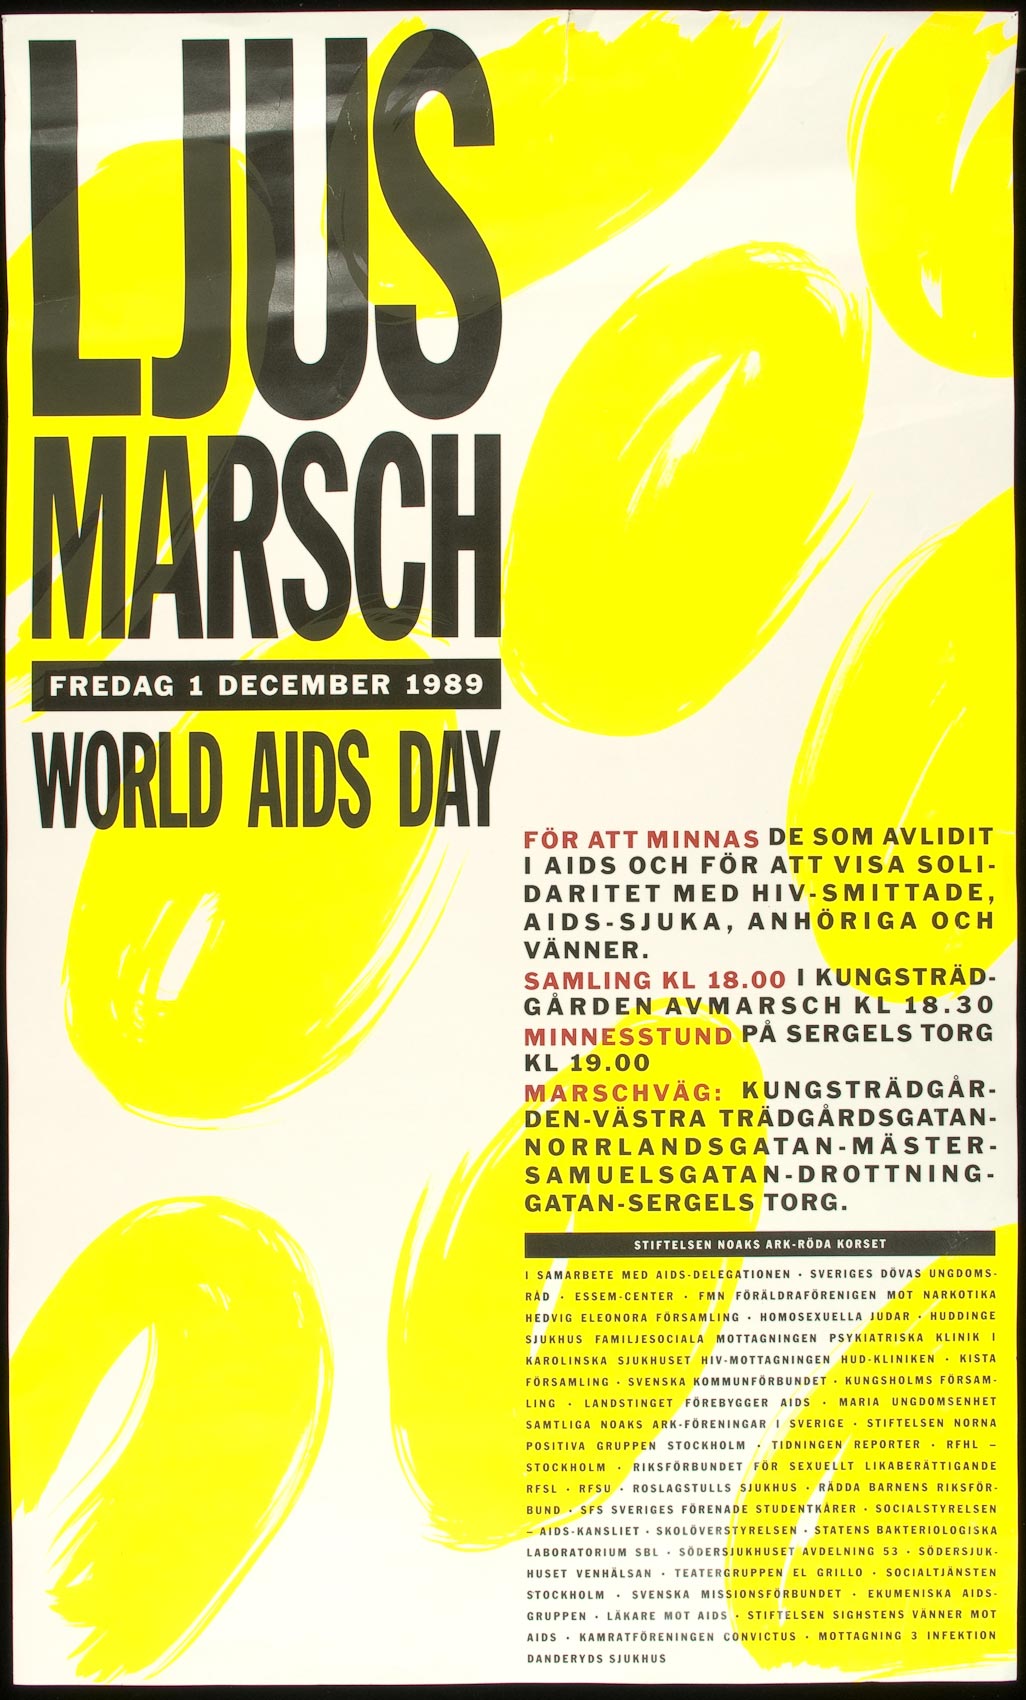 Stylized candle flames painted in vibrant yellow comprise the only visual element in this poster for World AIDS Day.